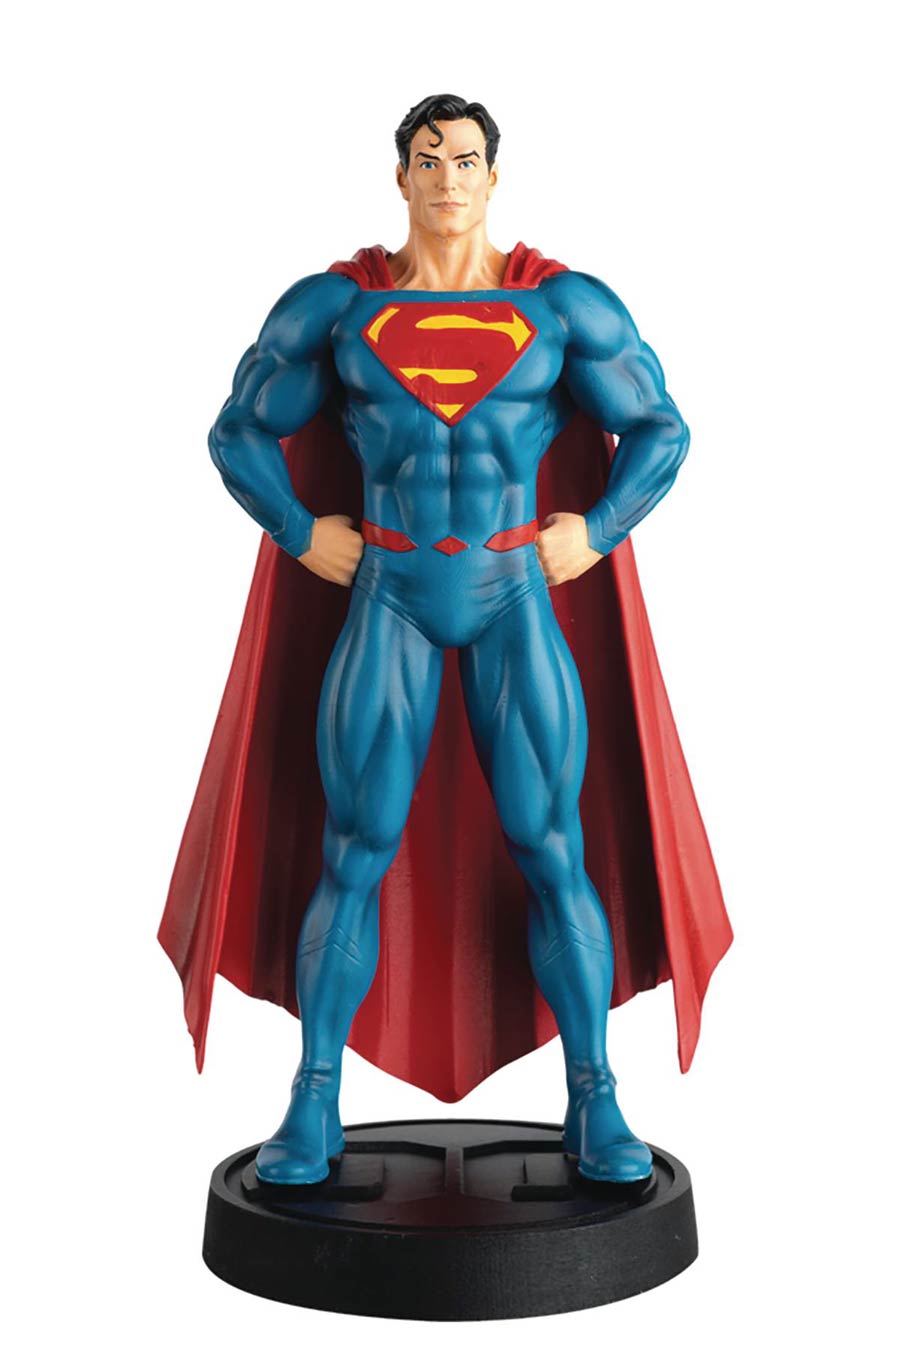 DC All-Stars Figurine Collection #3 Superman